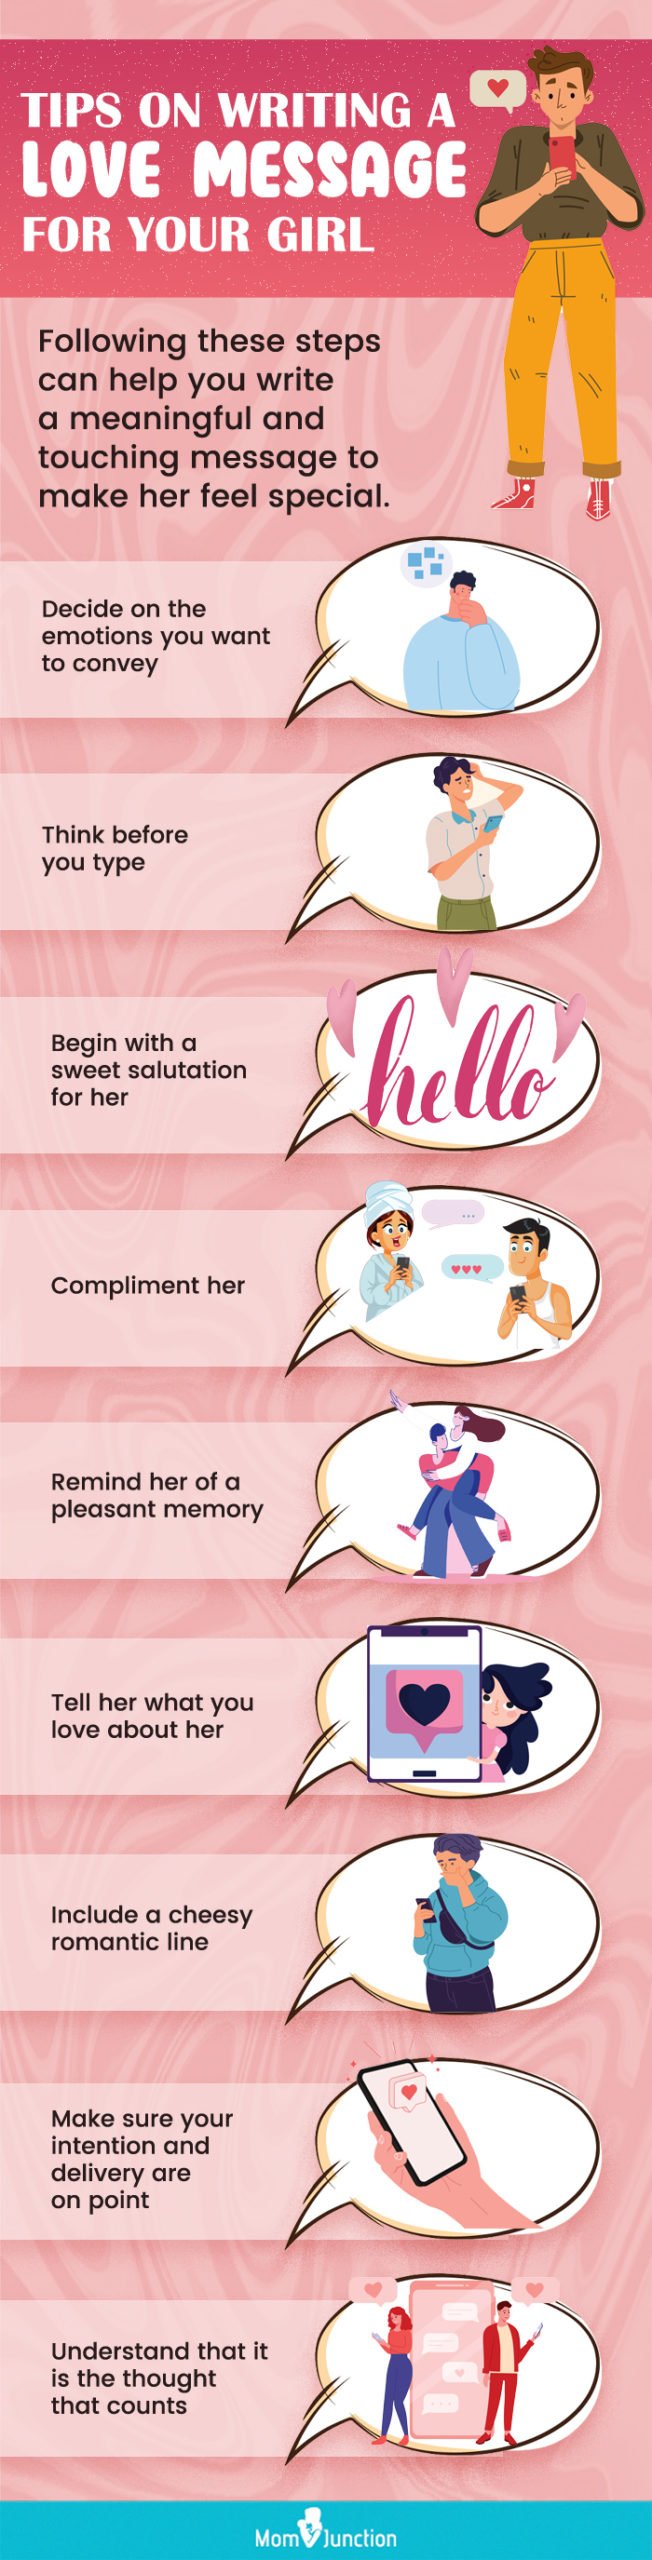 tips on writing a love message for your girl [infographic]